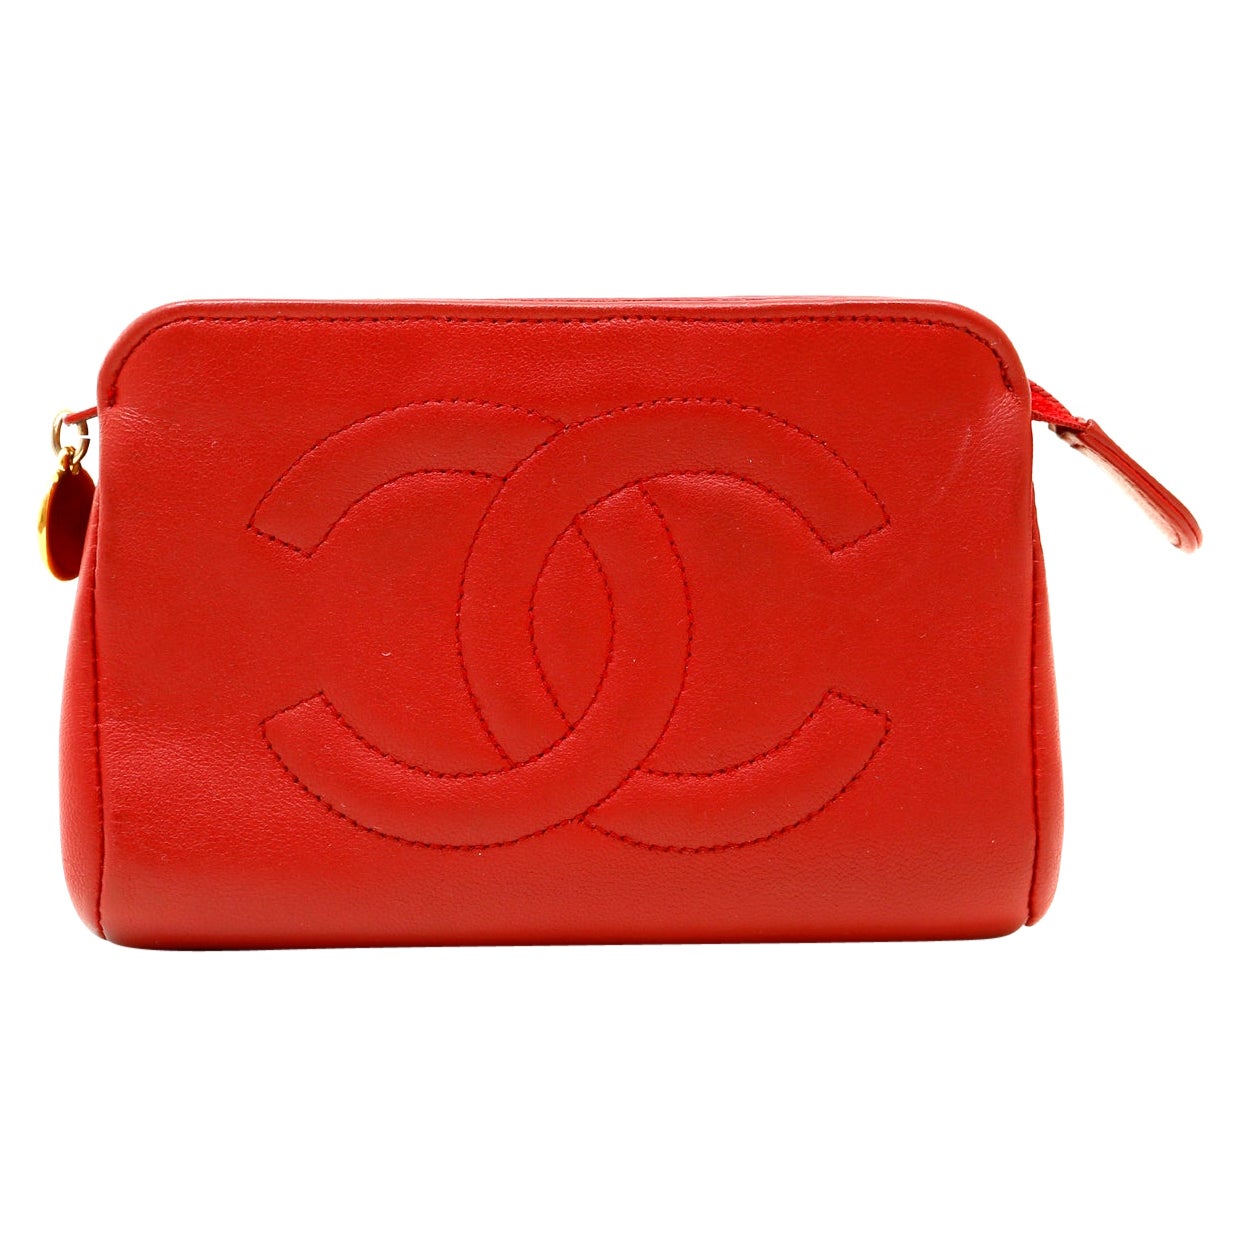 Chanel Coin Purse - 26 For Sale on 1stDibs | chanel coin purse 